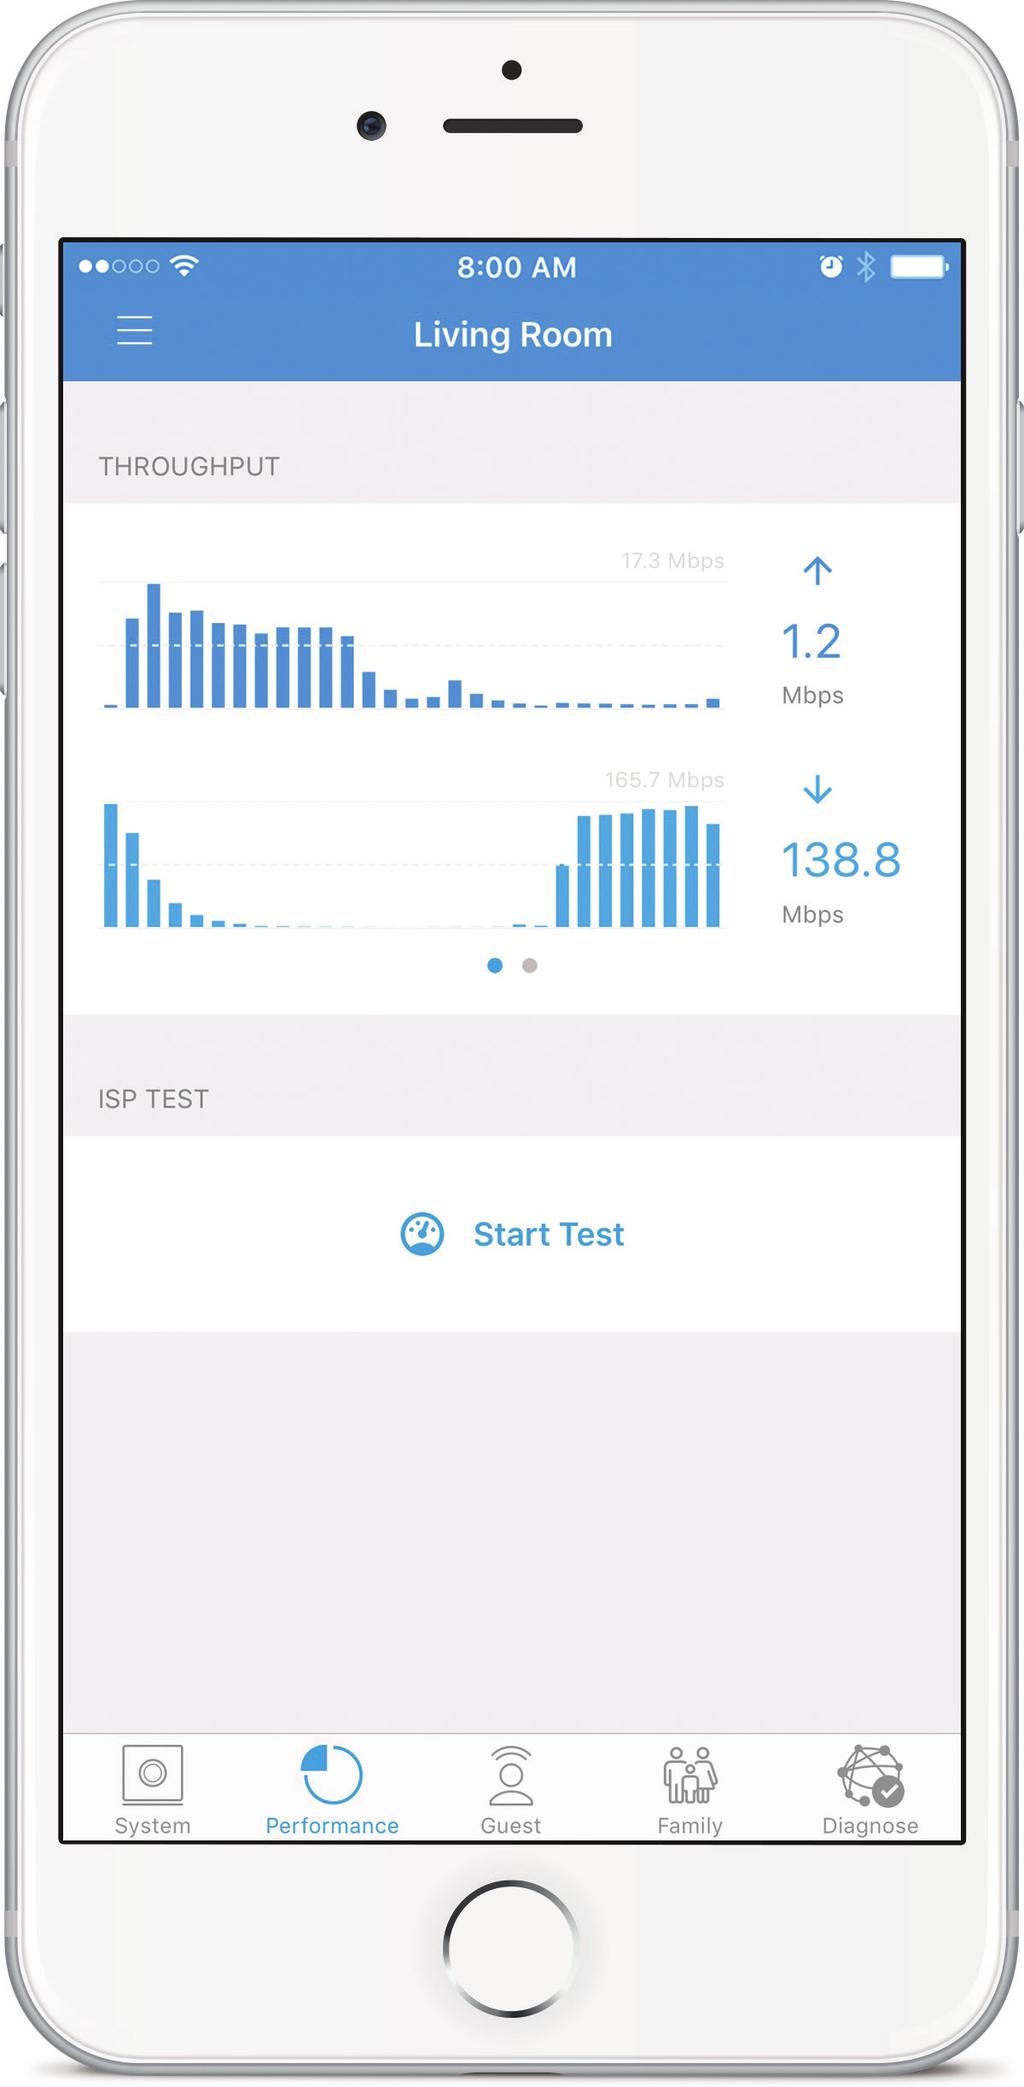 AmpliFi User Guide Chapter 7: Performance The Performance screen allows you to access the throughput statistics and run a speed test.